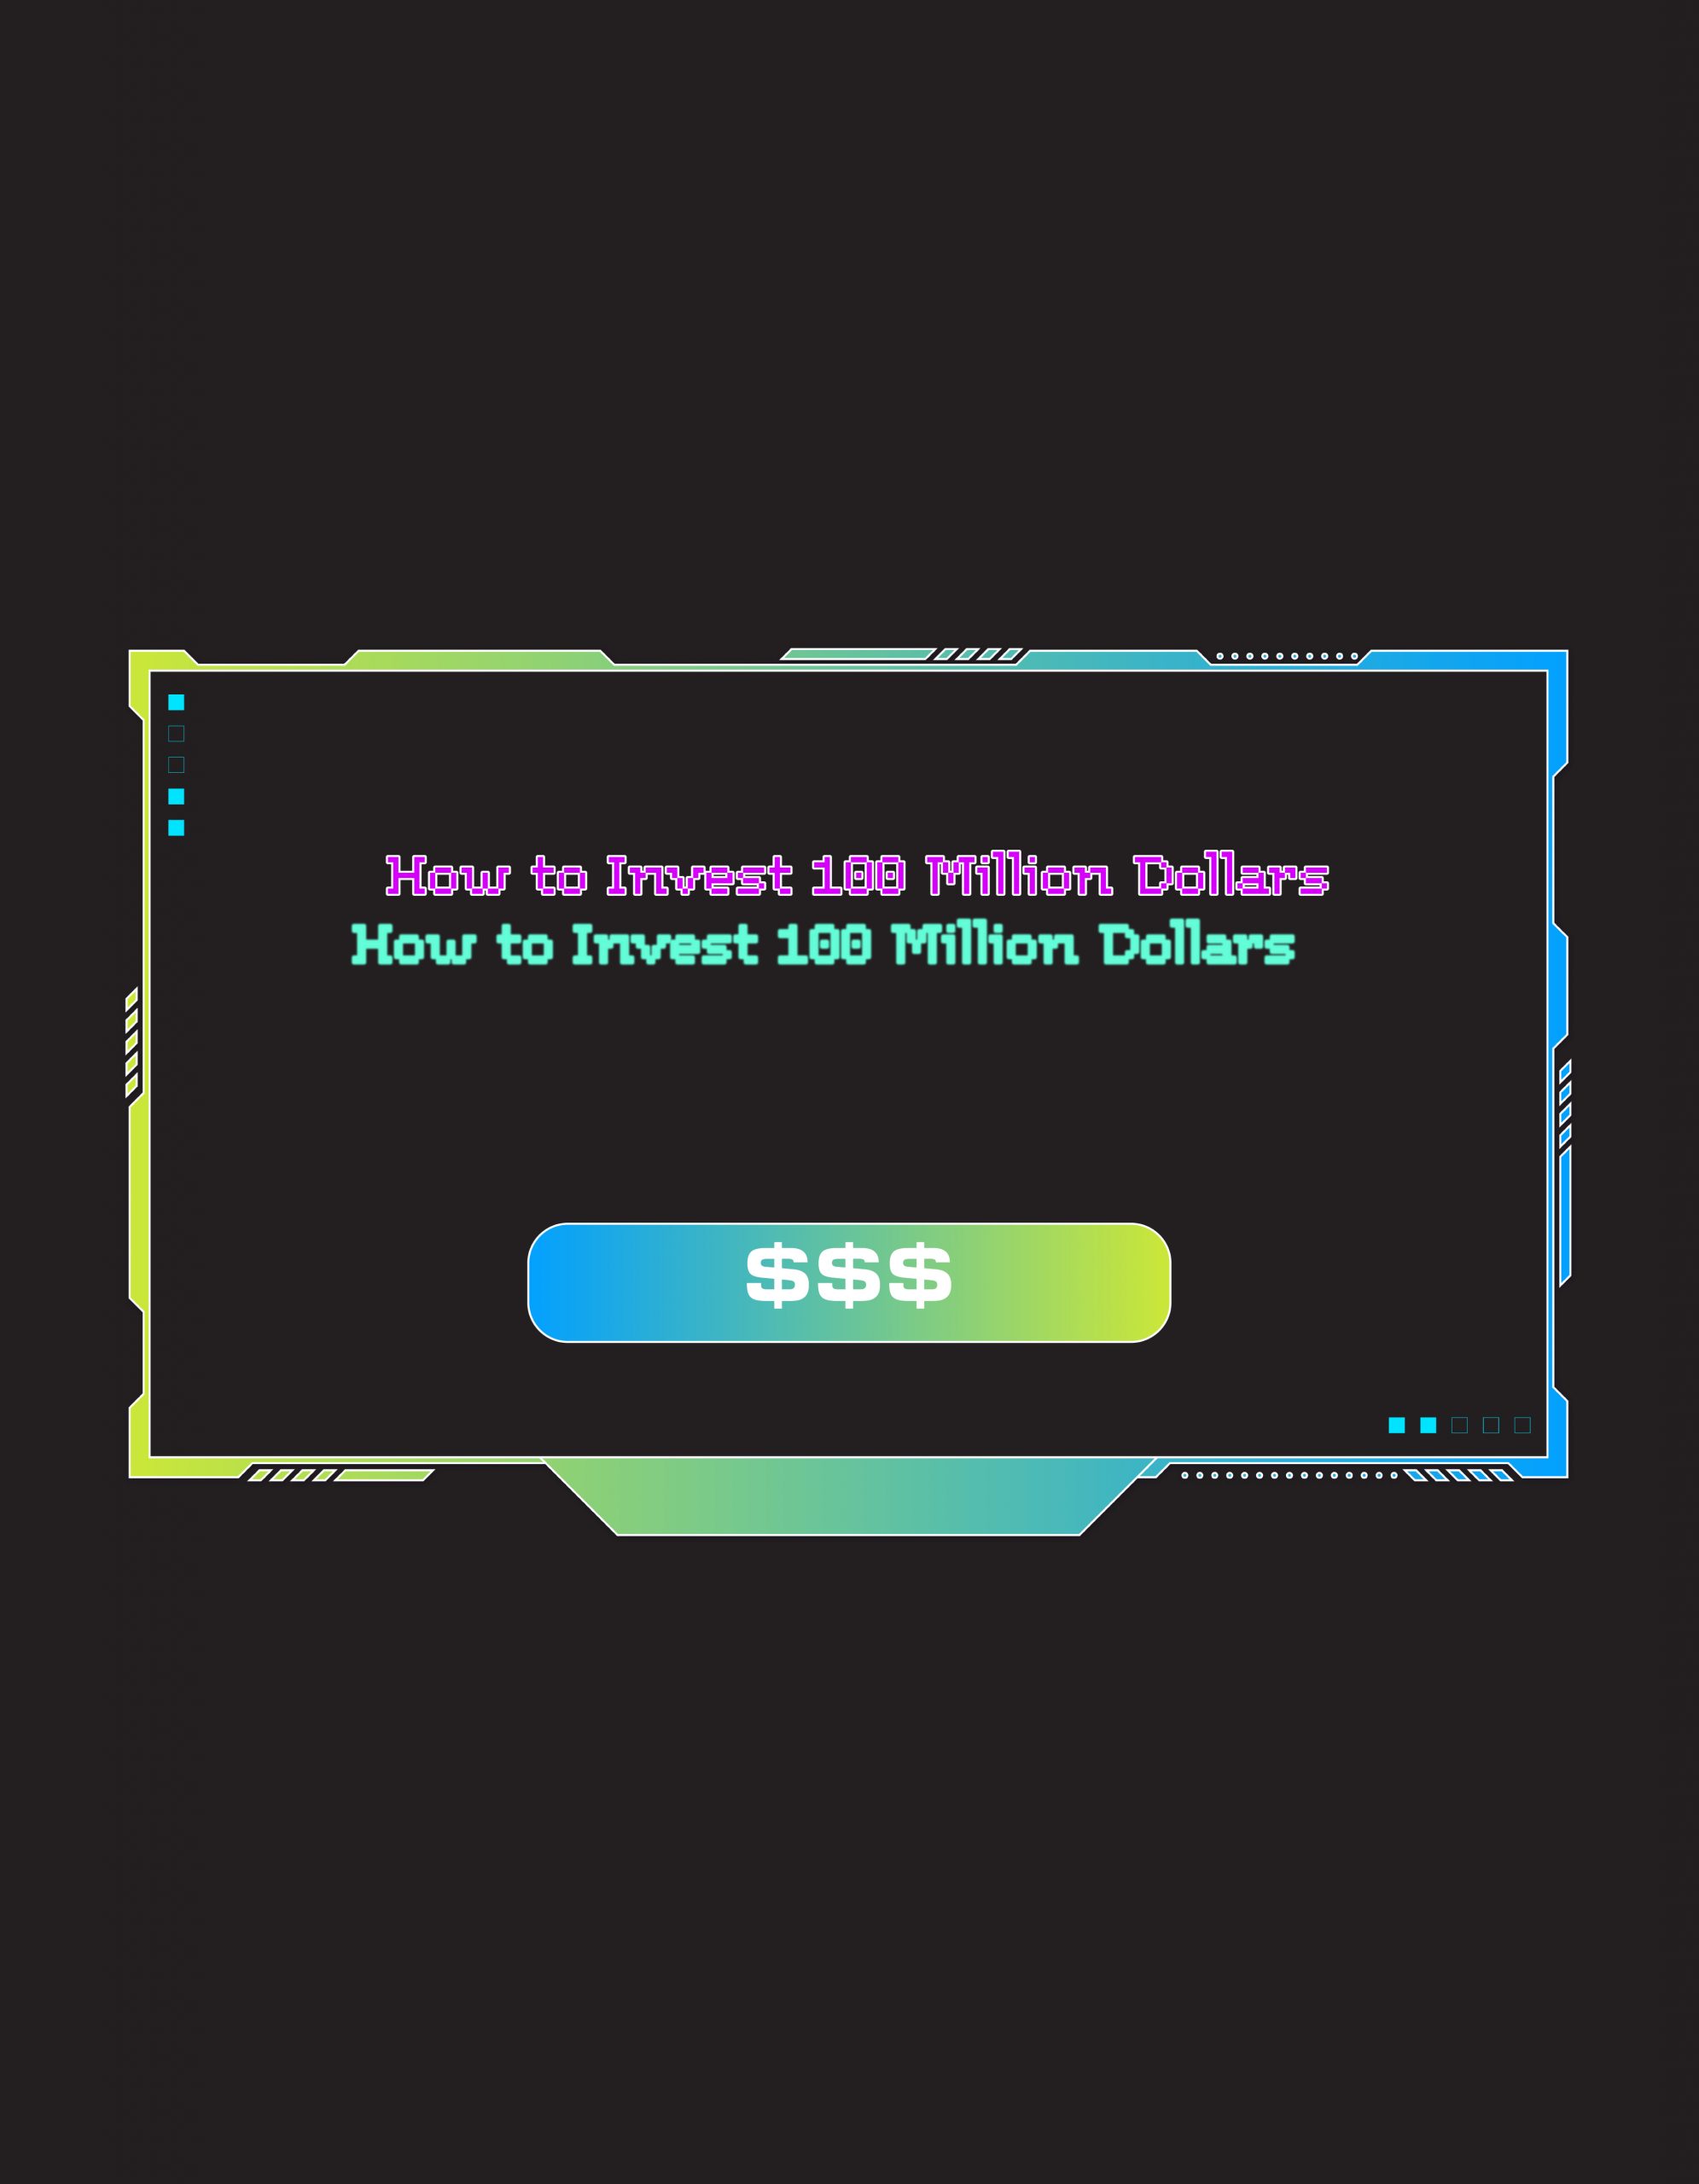 How to Invest 100 Million Dollars